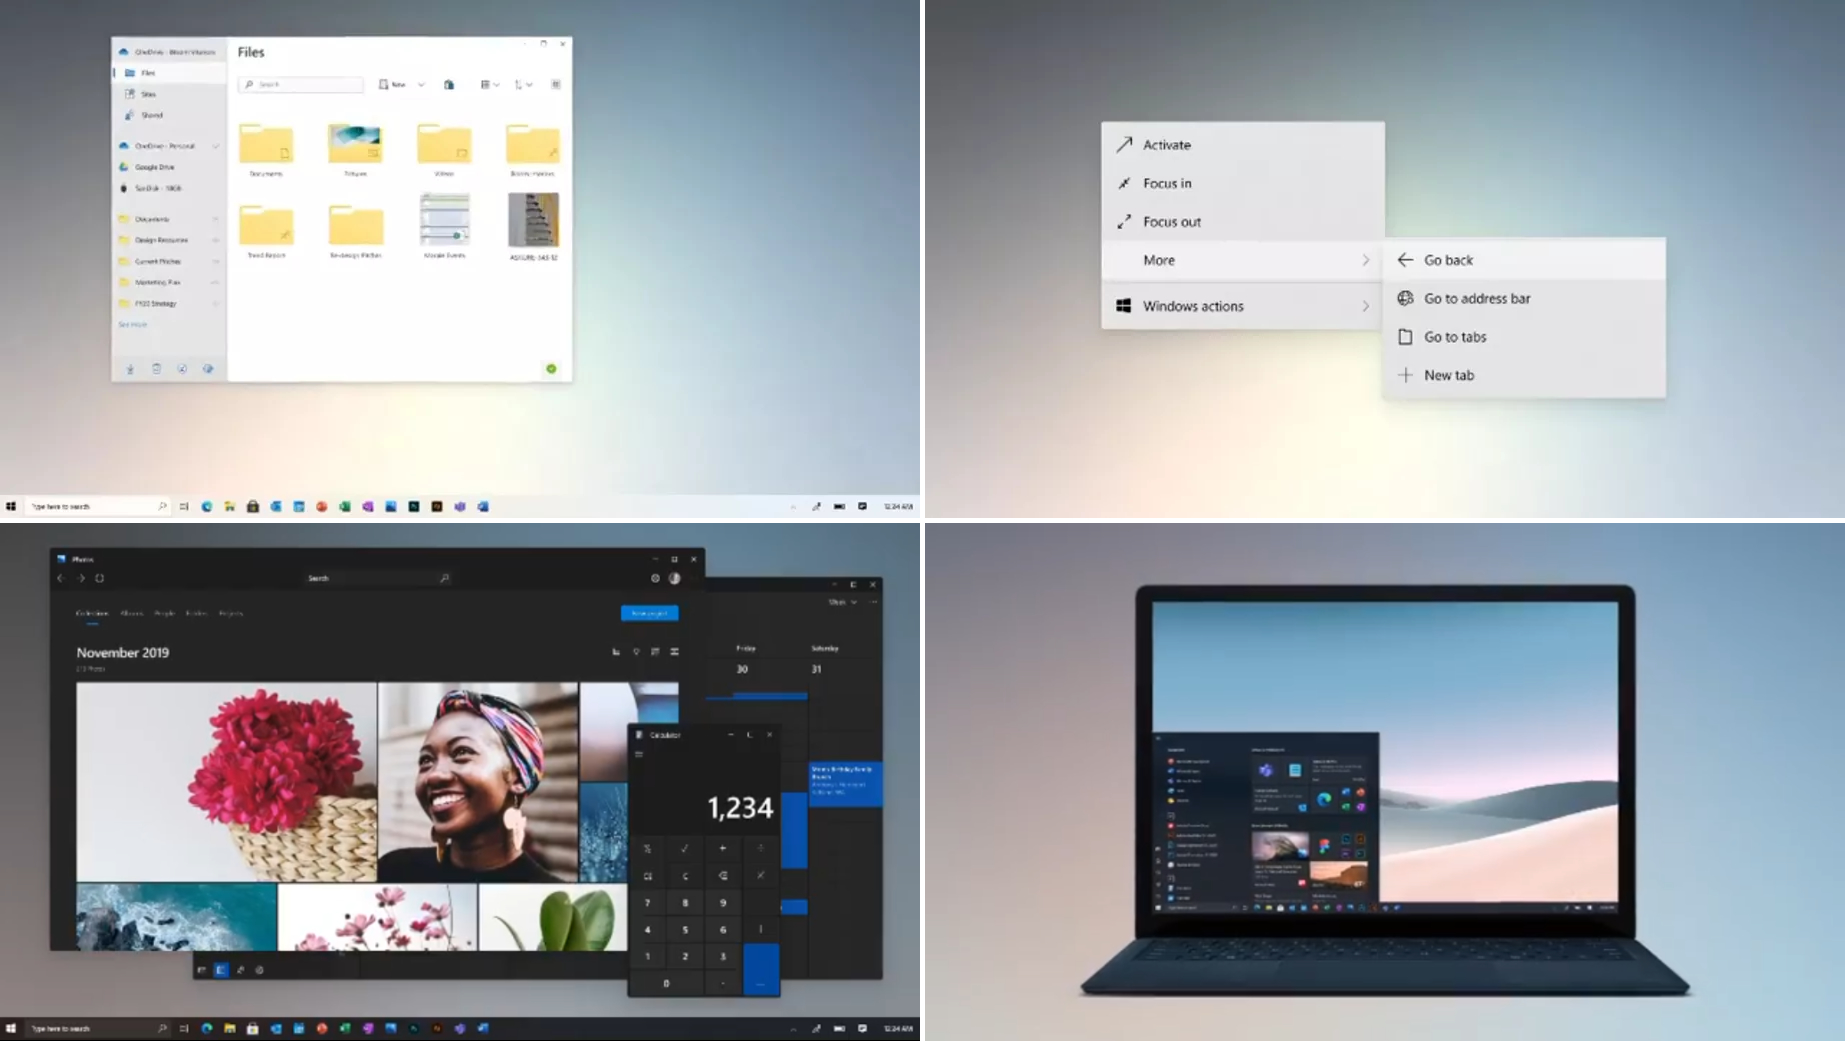 Microsoft product chief teases new Windows 10 UI in celebration of one billion users